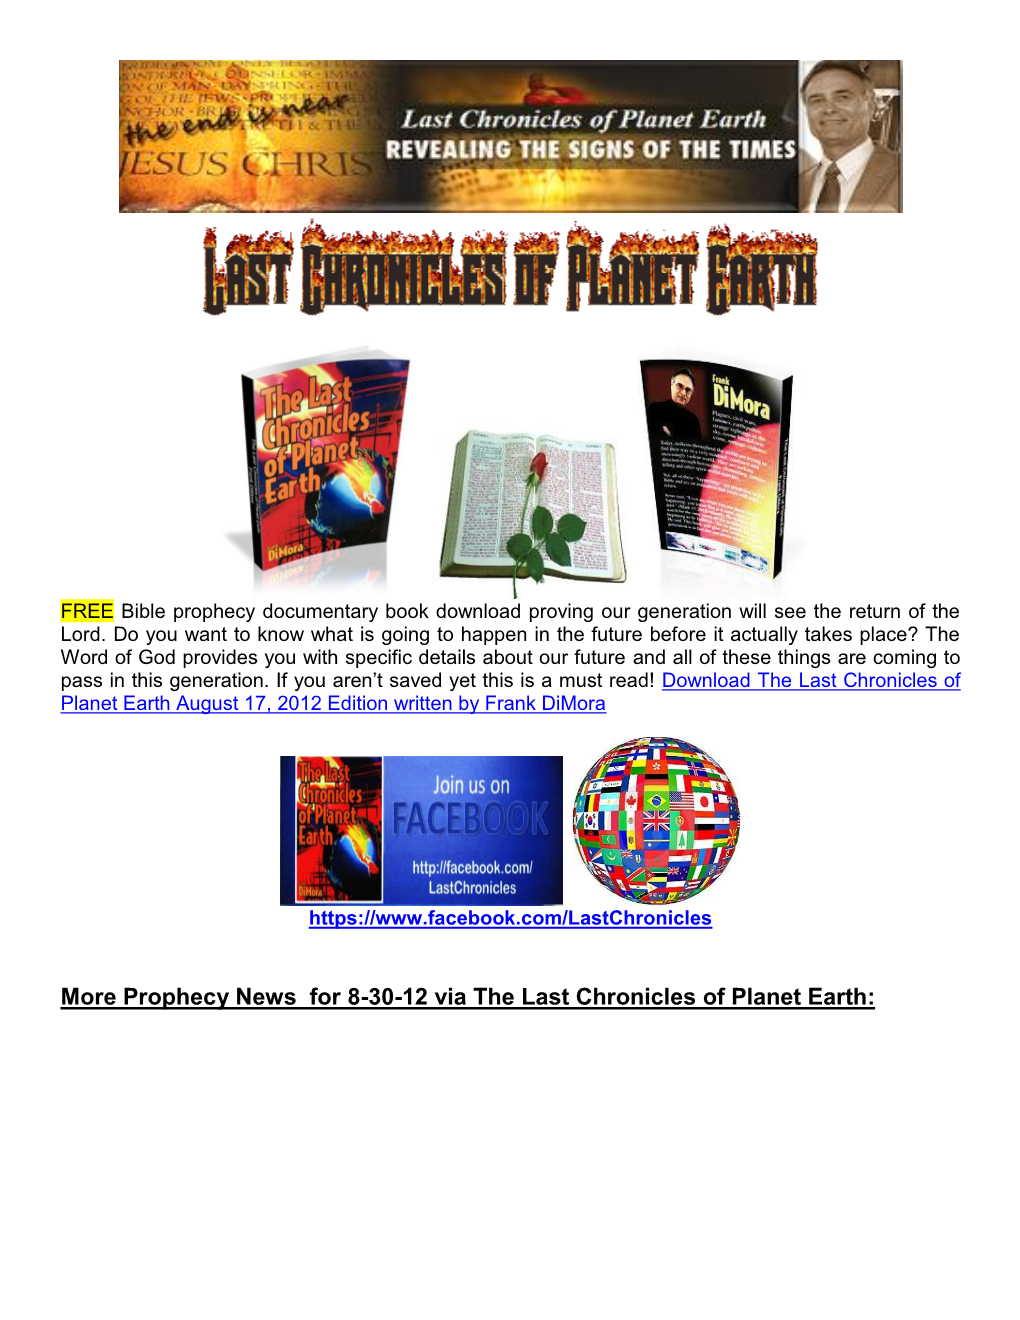 More Prophecy News for 8-30-12 Via the Last Chronicles of Planet Earth